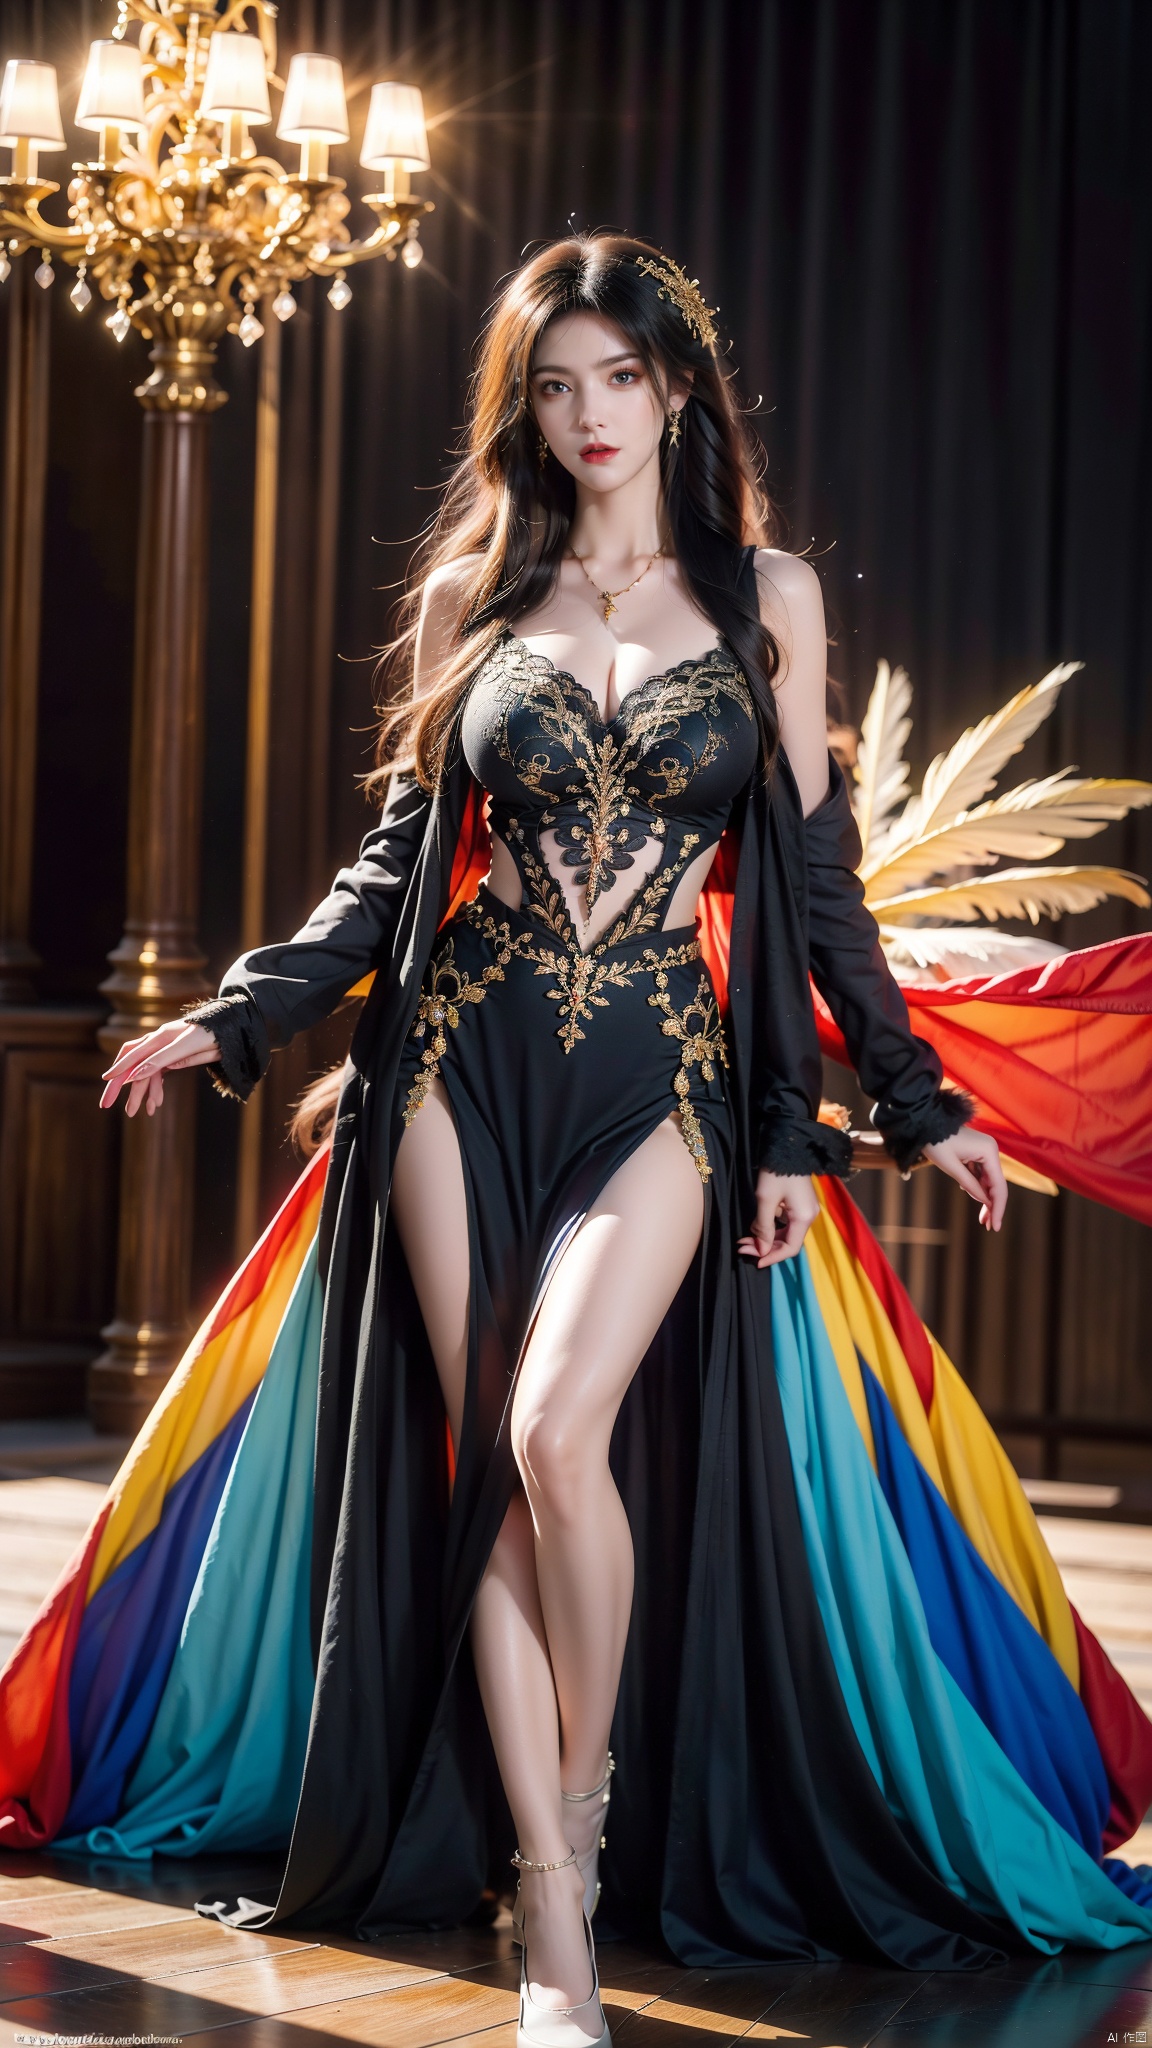  Beautiful woman, well shaped, ample feathers, rainbow colors, gradient colors, feather clothing, complex details, decorations, Baroque, extra long hair, colorful hair colors, wavy, full body, background blurring,(big breasts:1.26),